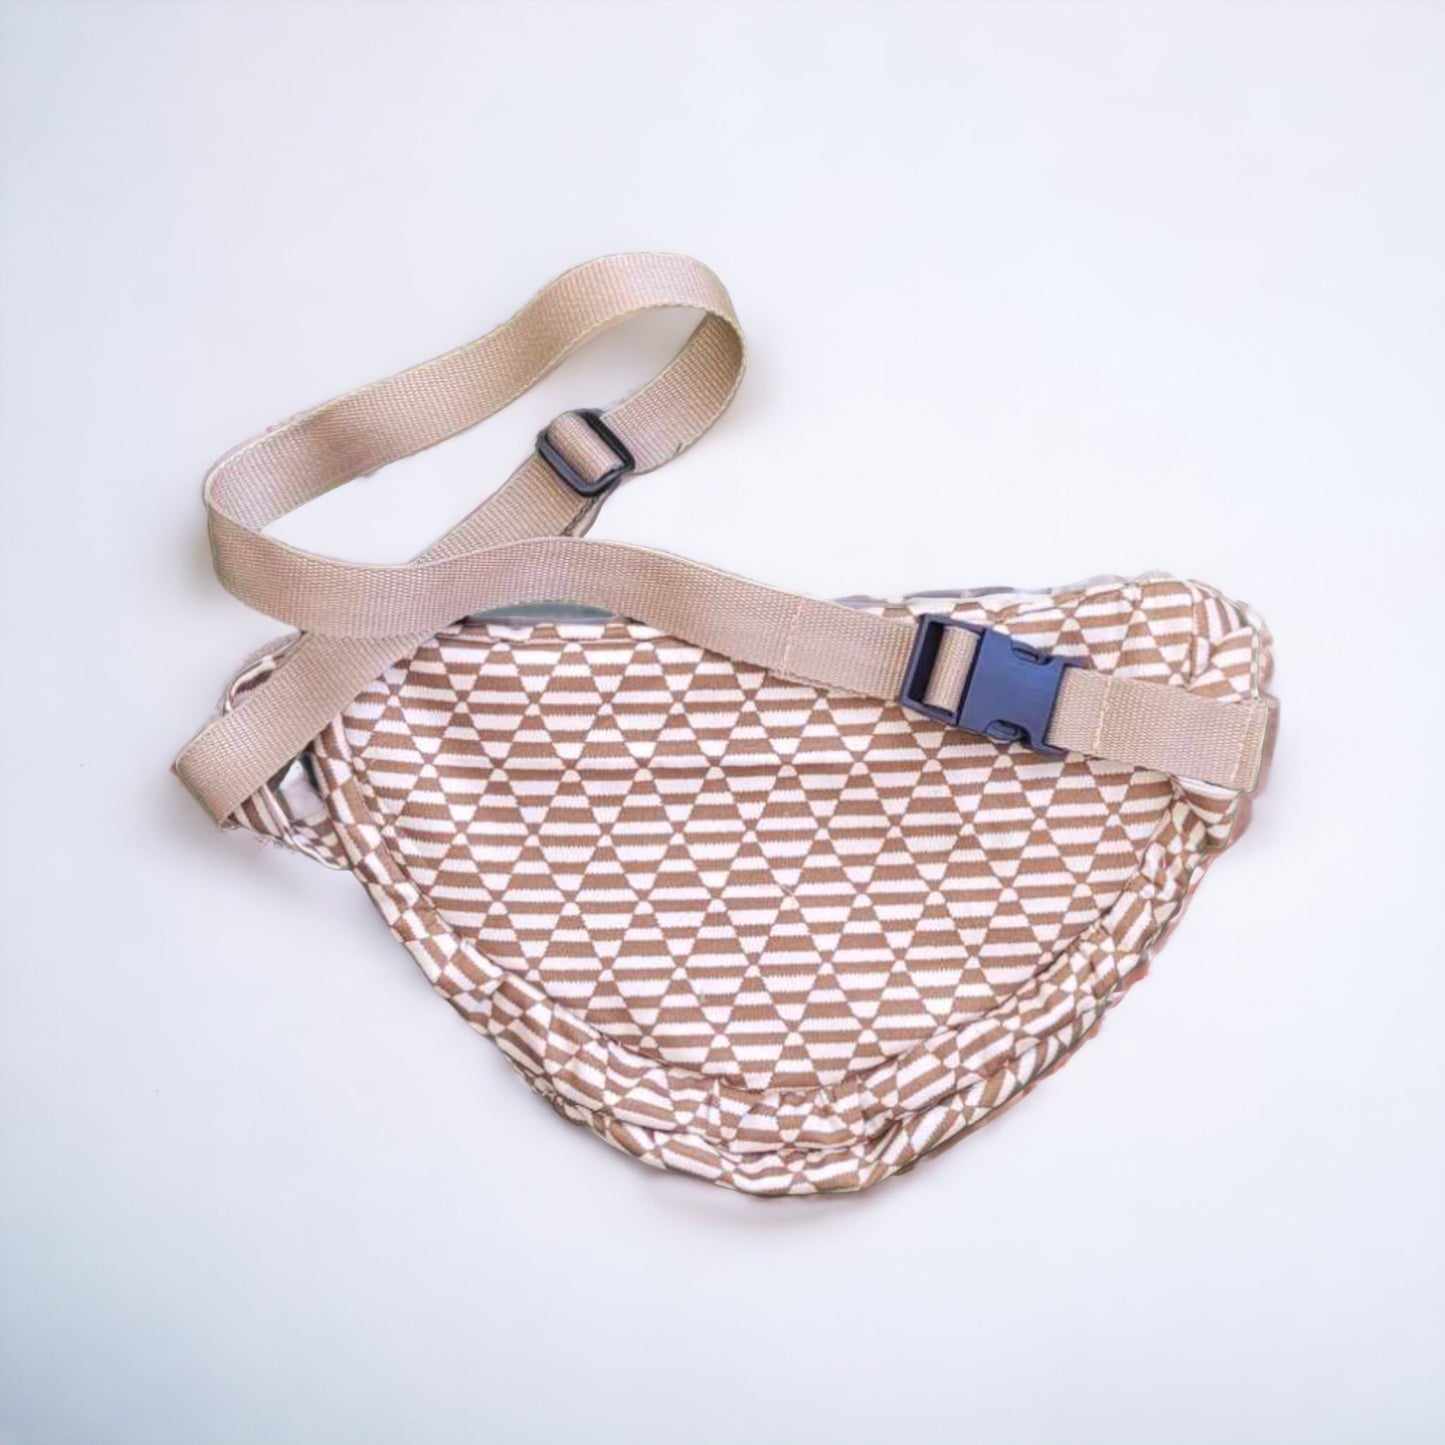 Printed fanny pack